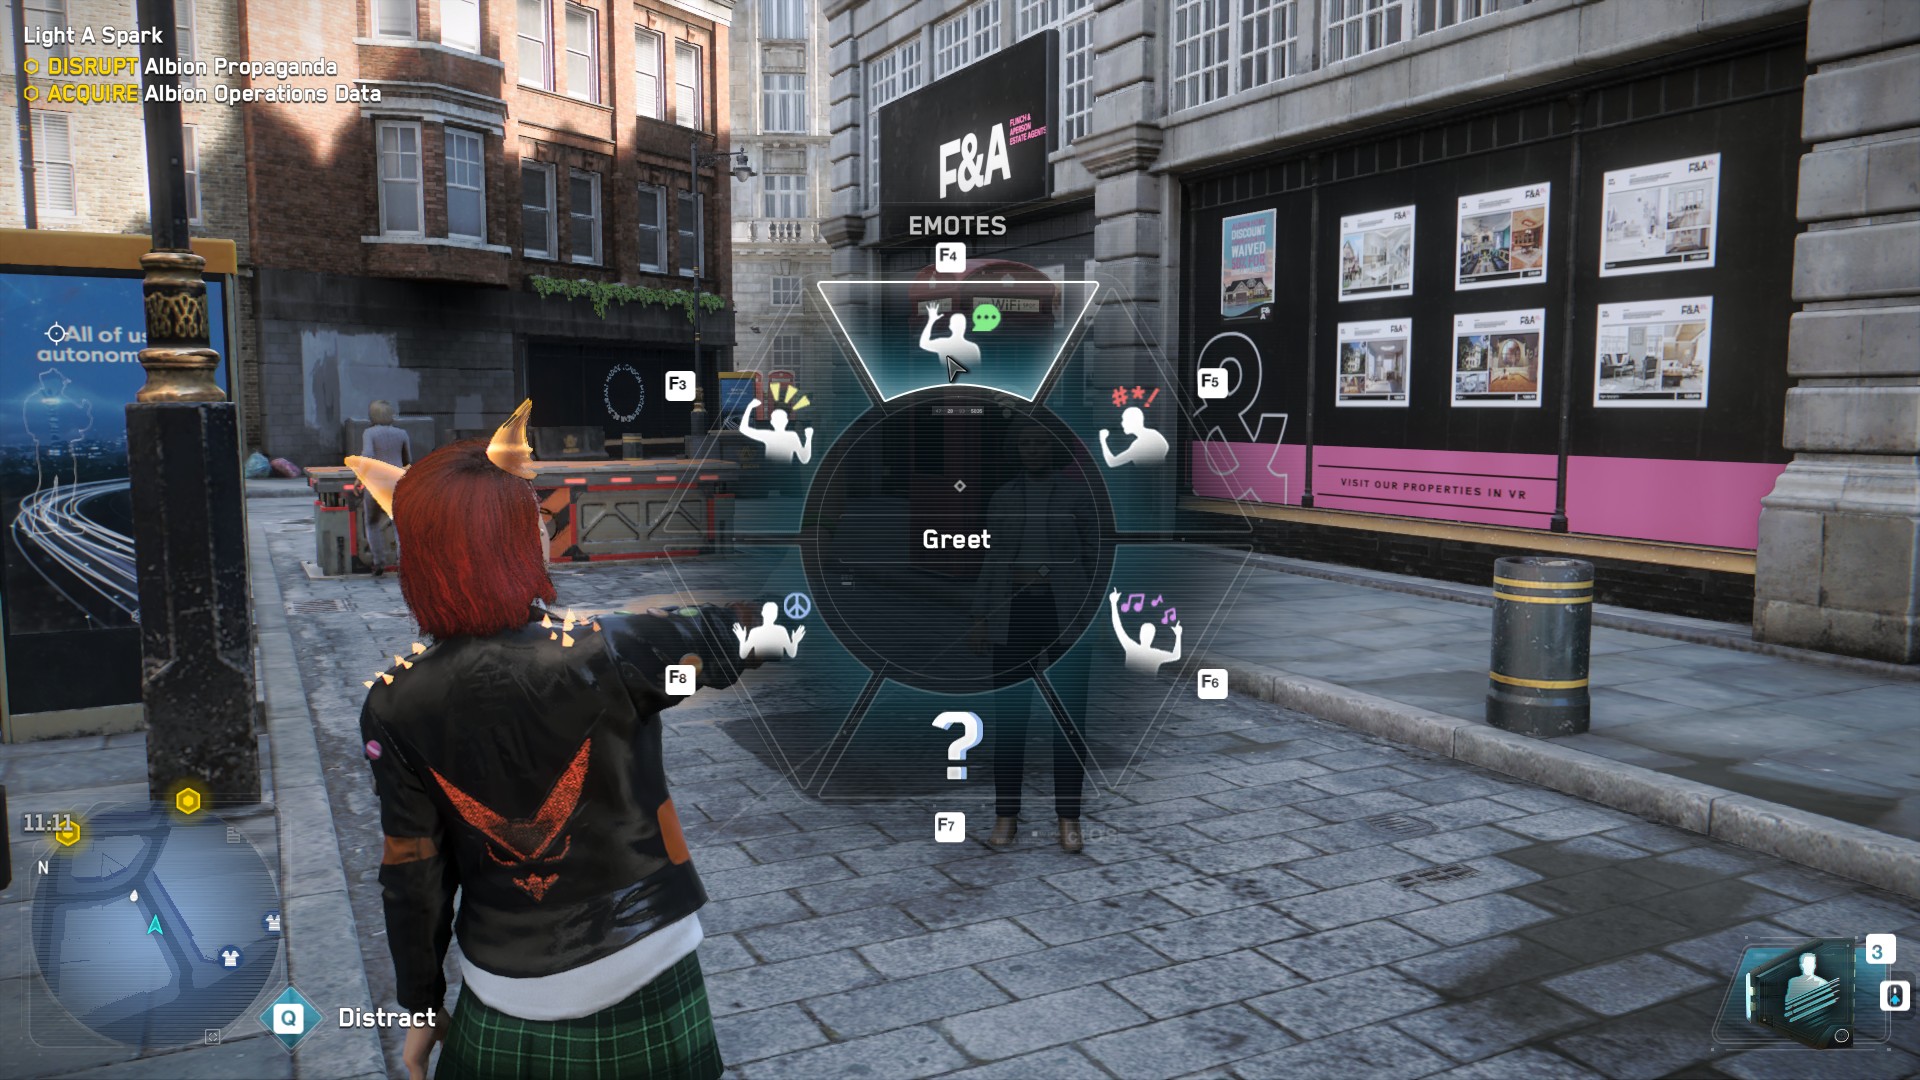 Spoiler-Free Tips & Advice For Starting Watch Dogs: Legion - Game